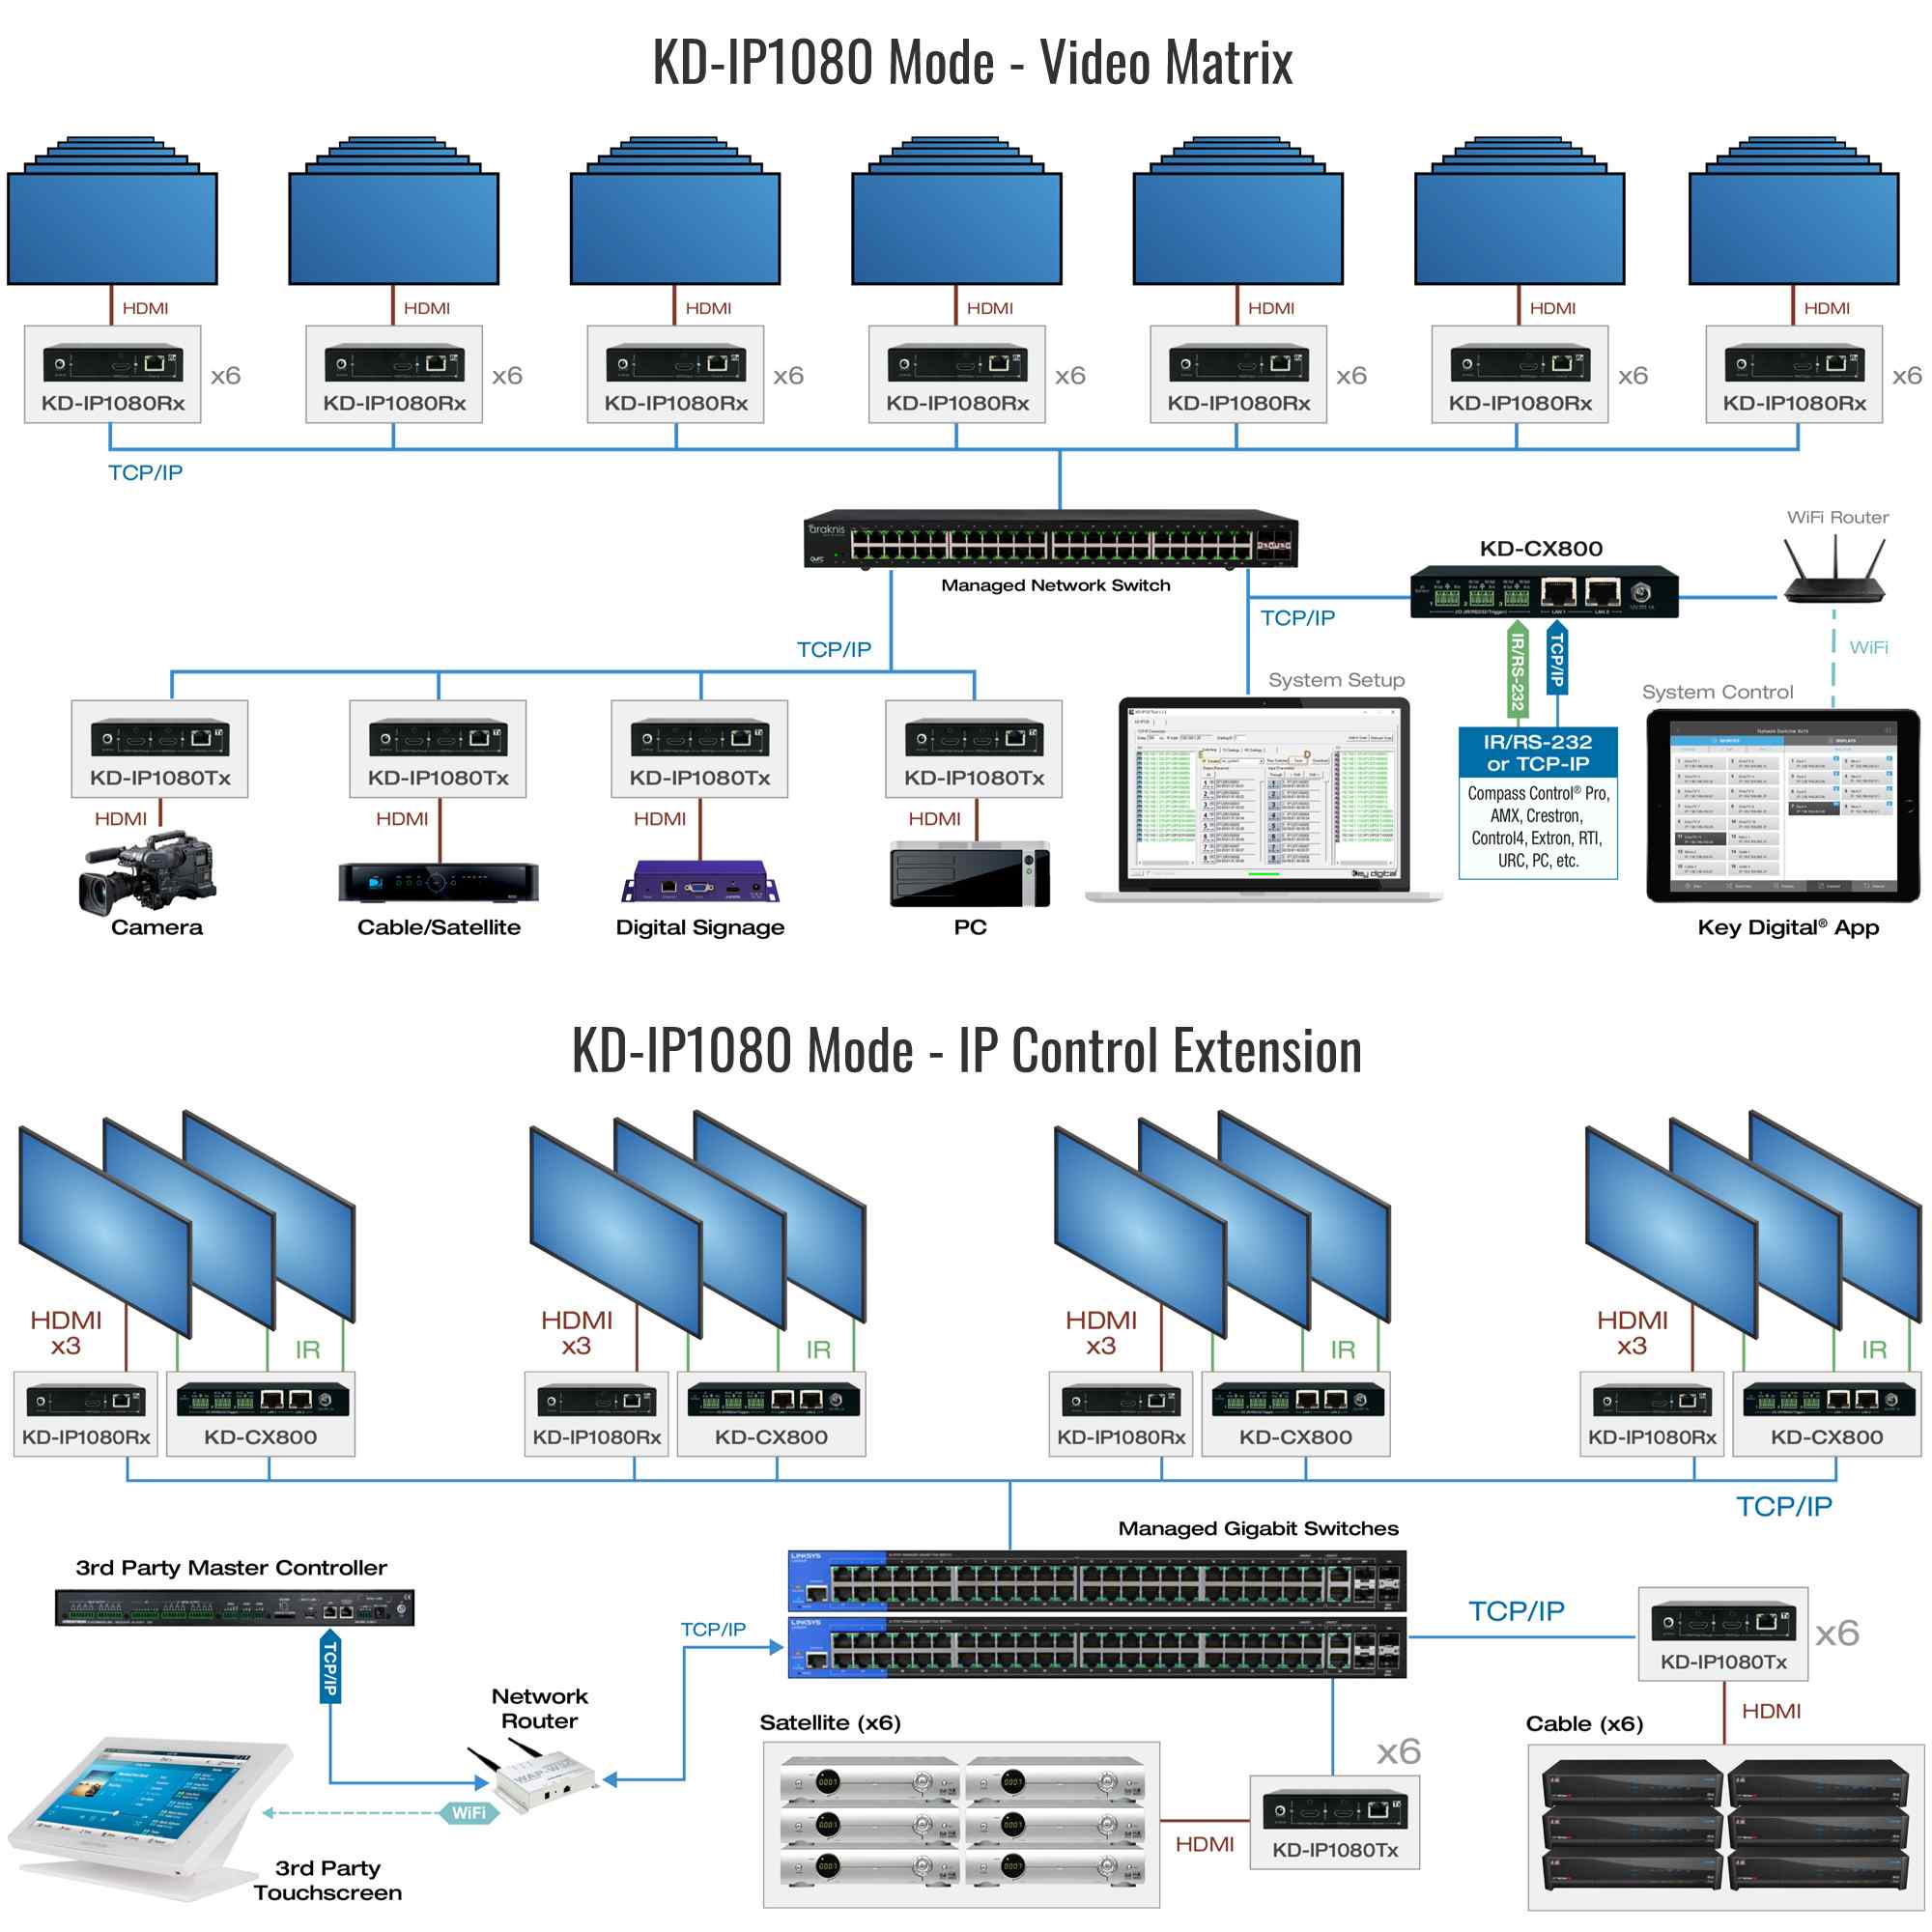 Example Diagram showing video matrix and IP control extension of HDMI over IP